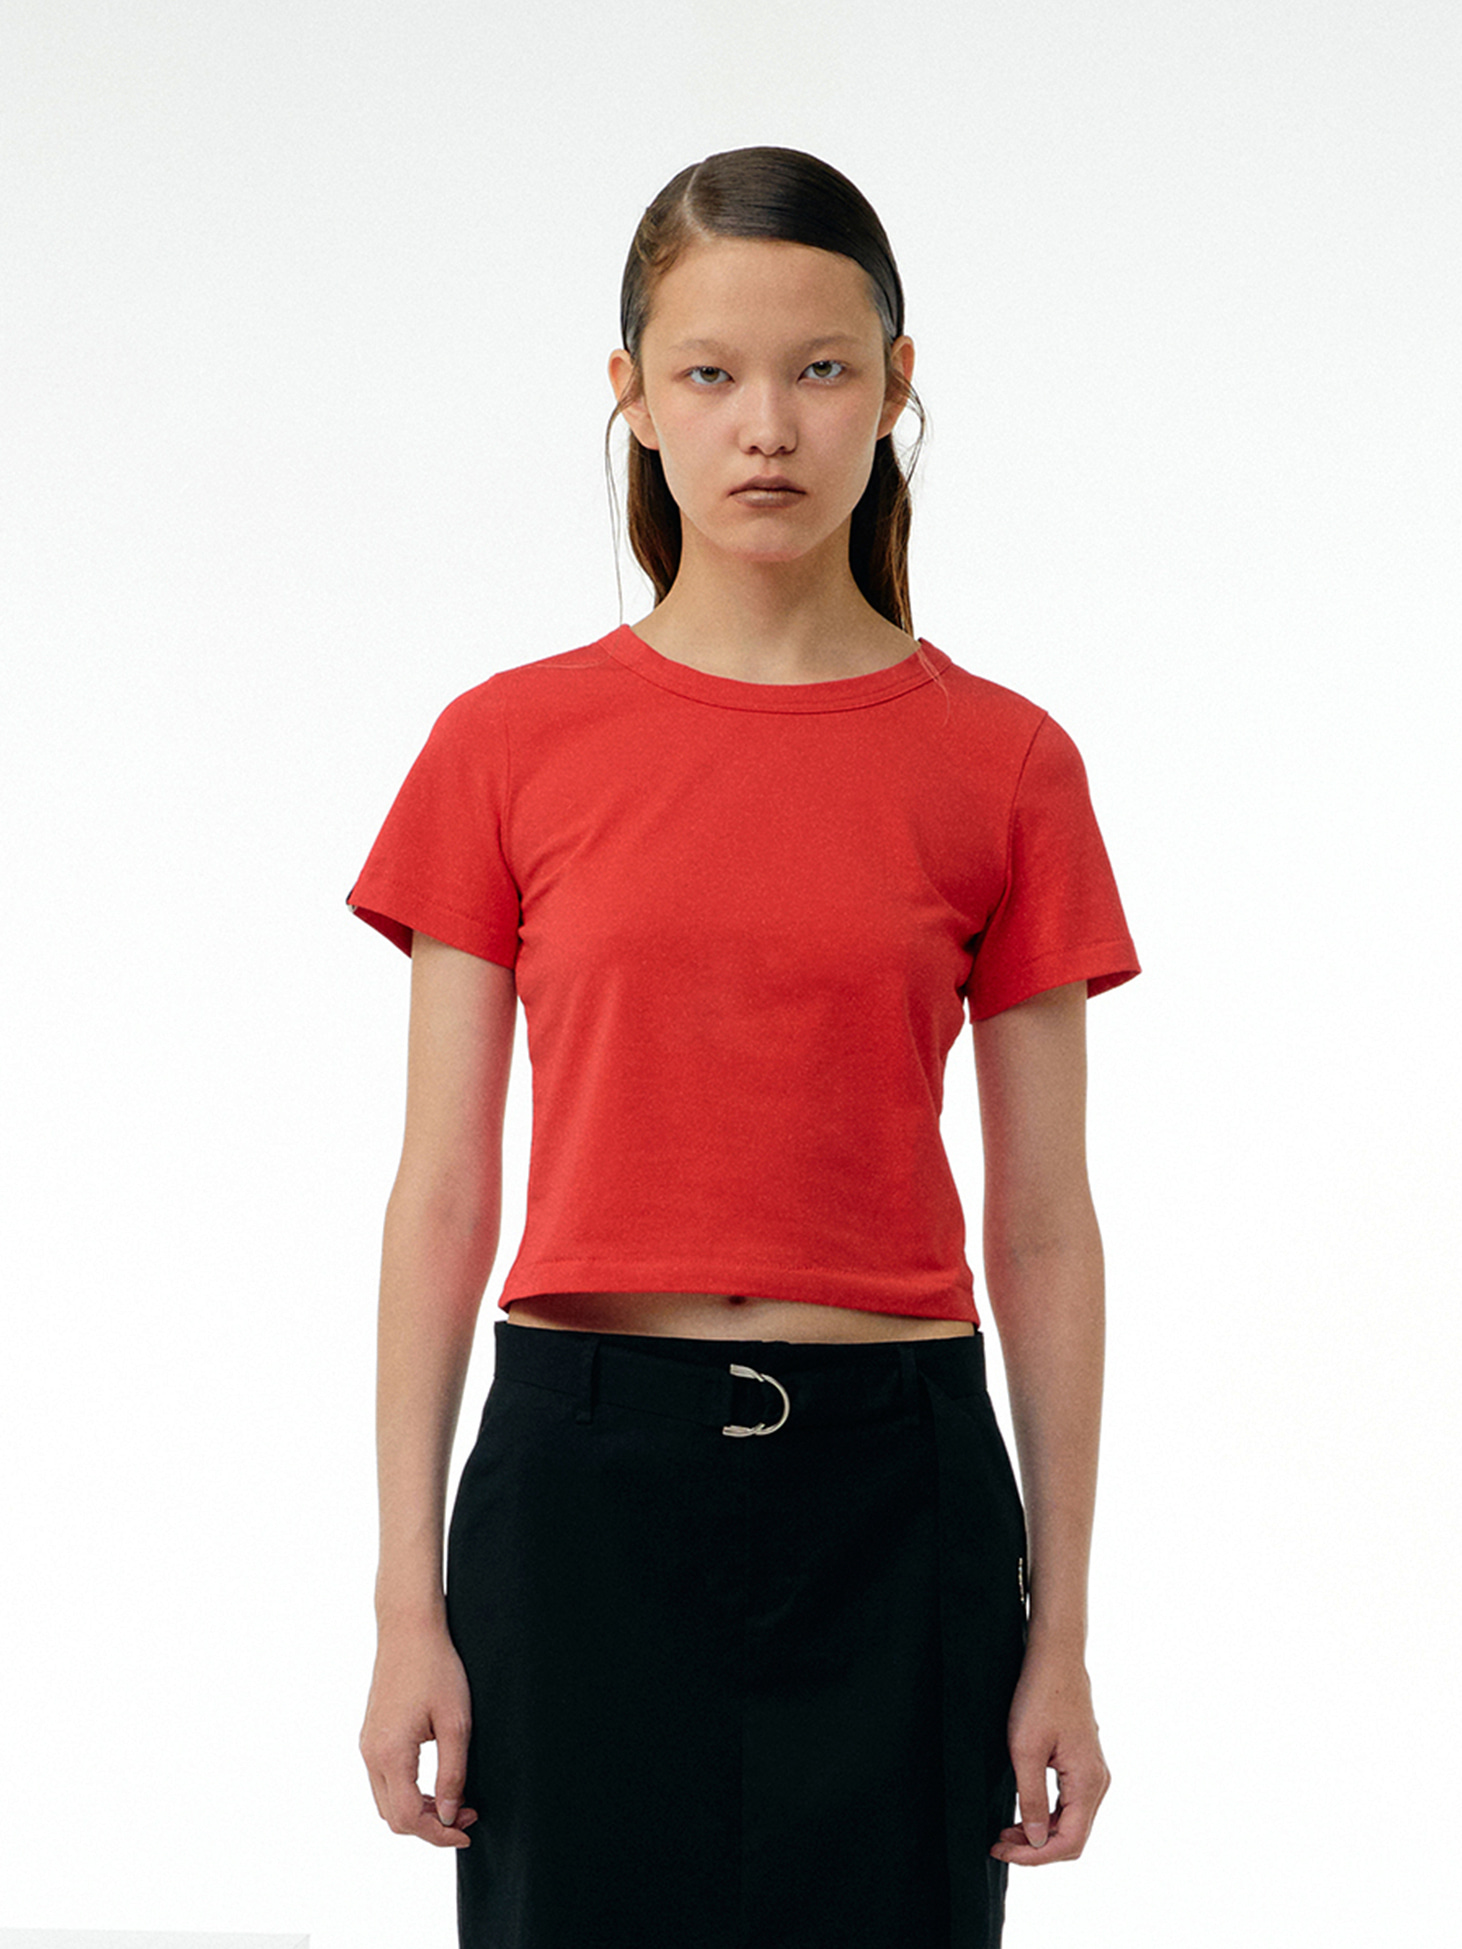 Stitch detail cropped t-shirt / Red